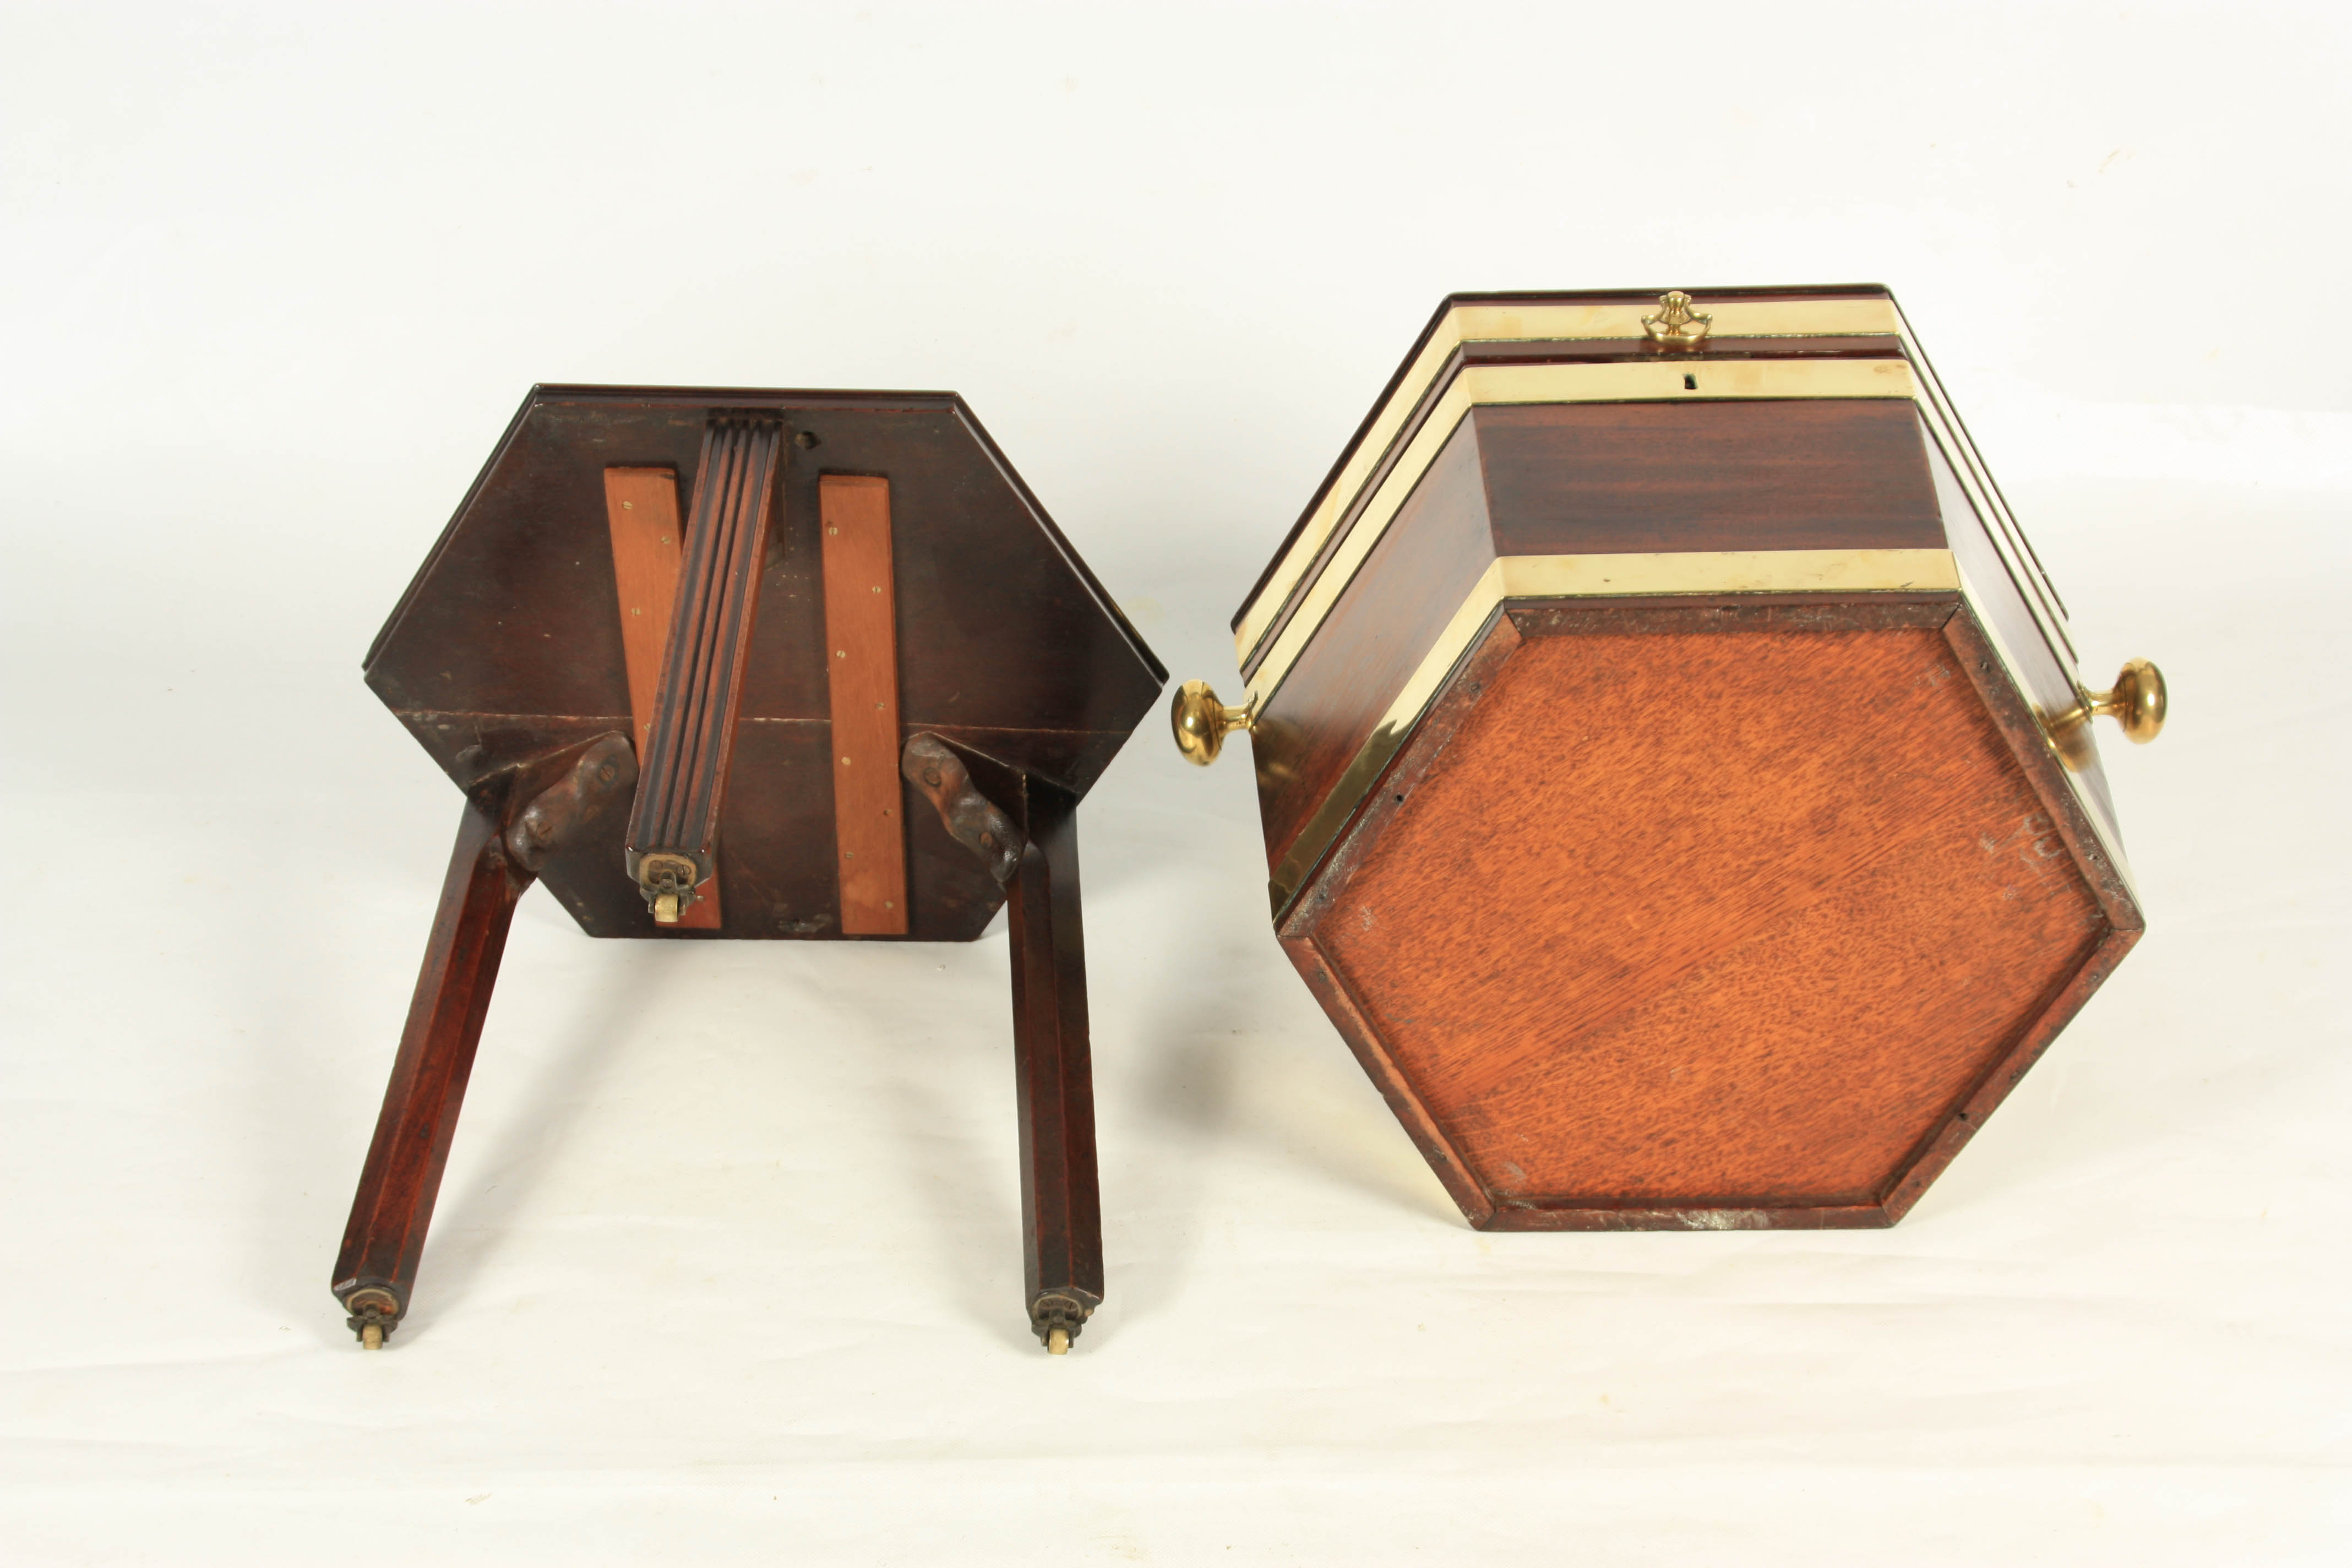 A GEORGE III MAHOGANY BRASS BOUND HEXAGONAL SHAPED CELLARETTE ON STAND with hinged top revealing a - Image 6 of 6